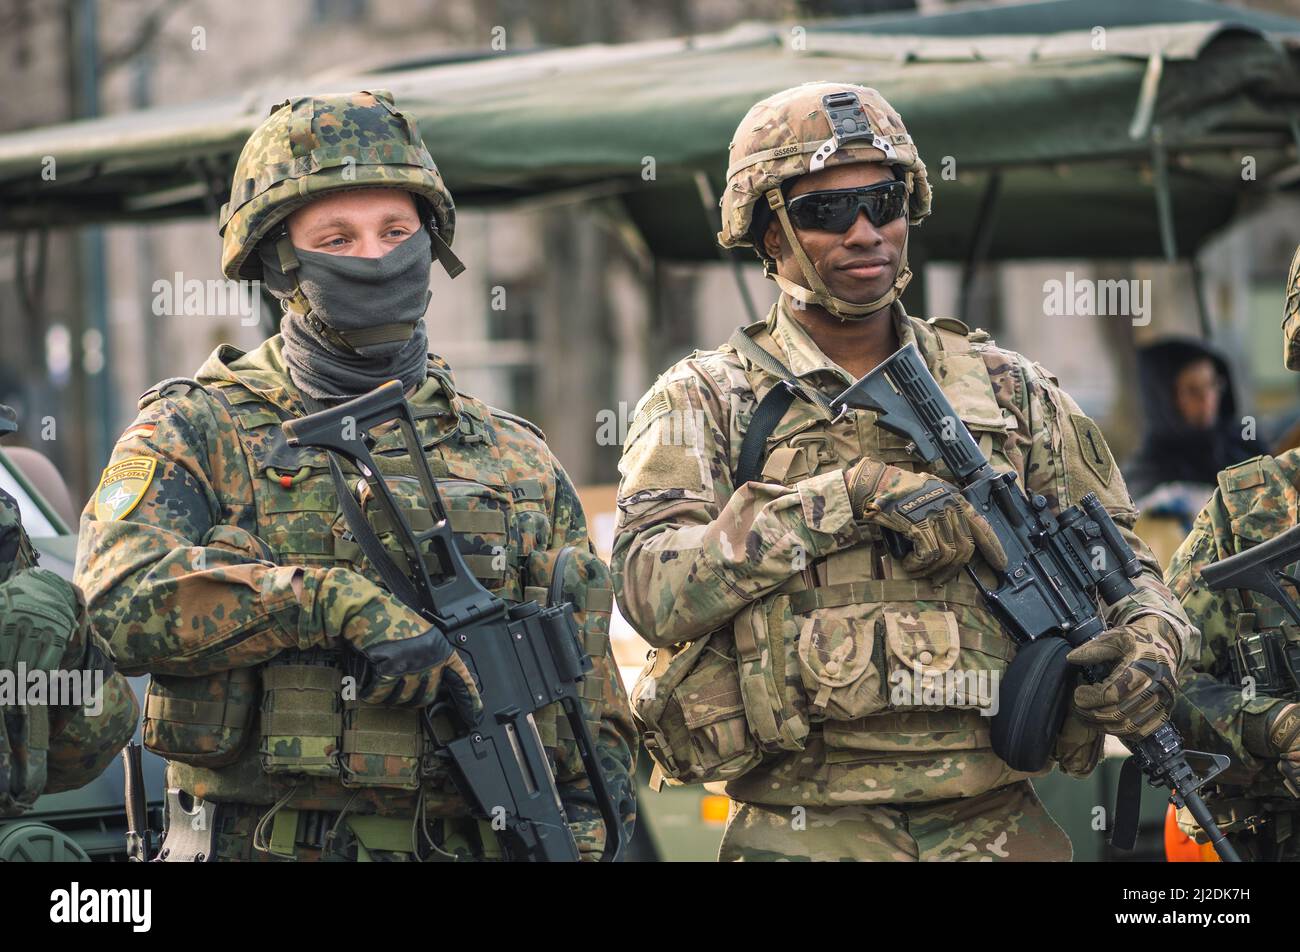 NATO soldier with sunglasses, shotgun or rifle and armored vehicle humvee, USA or US army troops ready for war Stock Photo